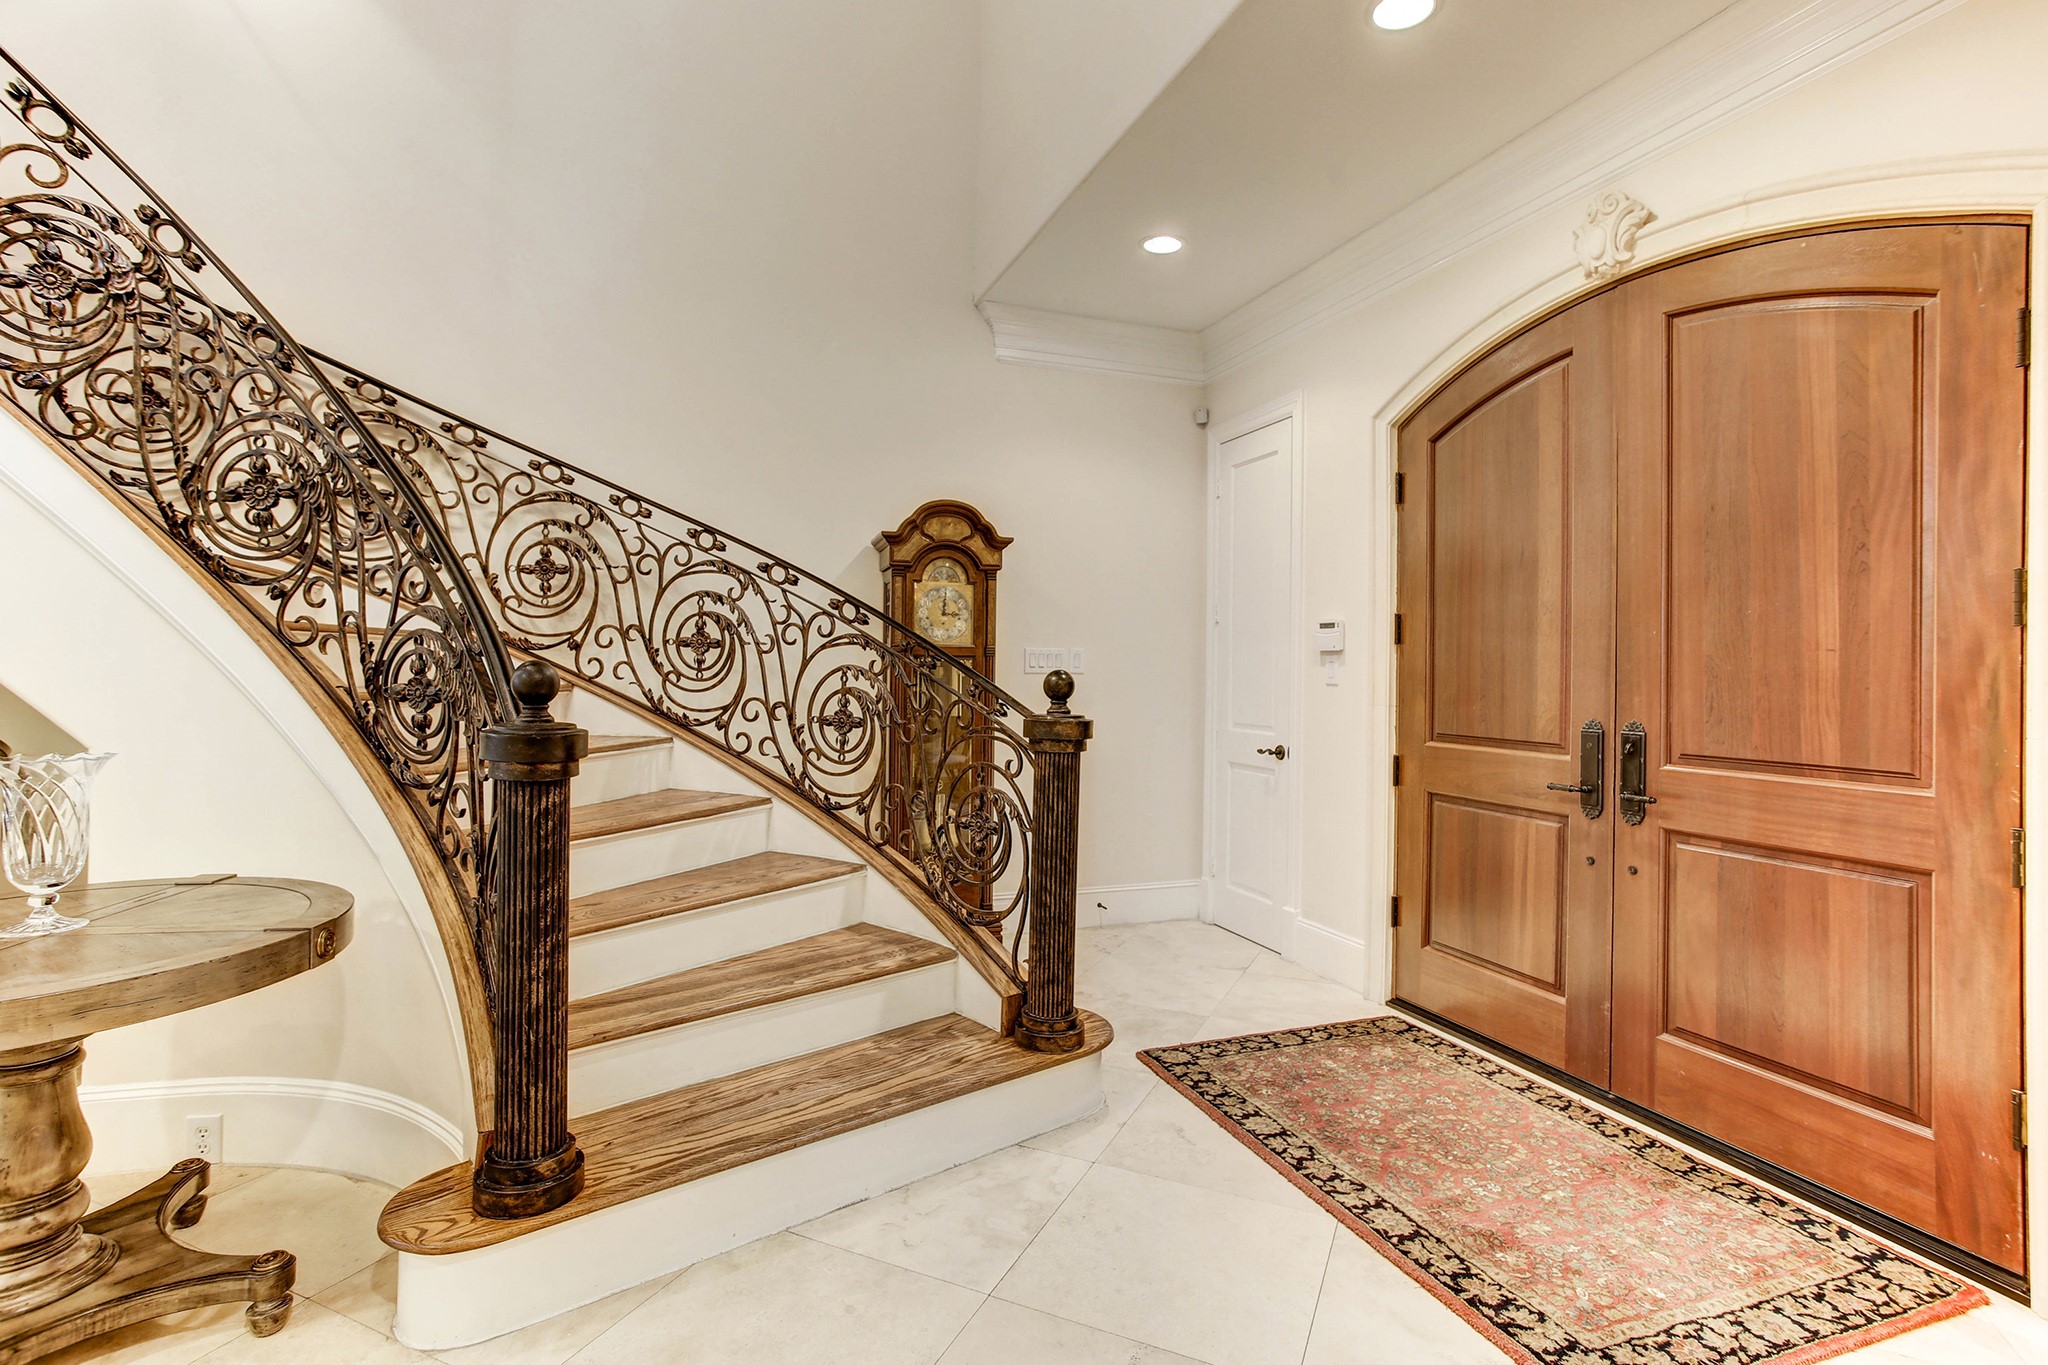 The sweeping staircase has decorative iron banister with wood steps leading to the 2nd floor landing with hardwood floors.  The entrance has travertine marble.